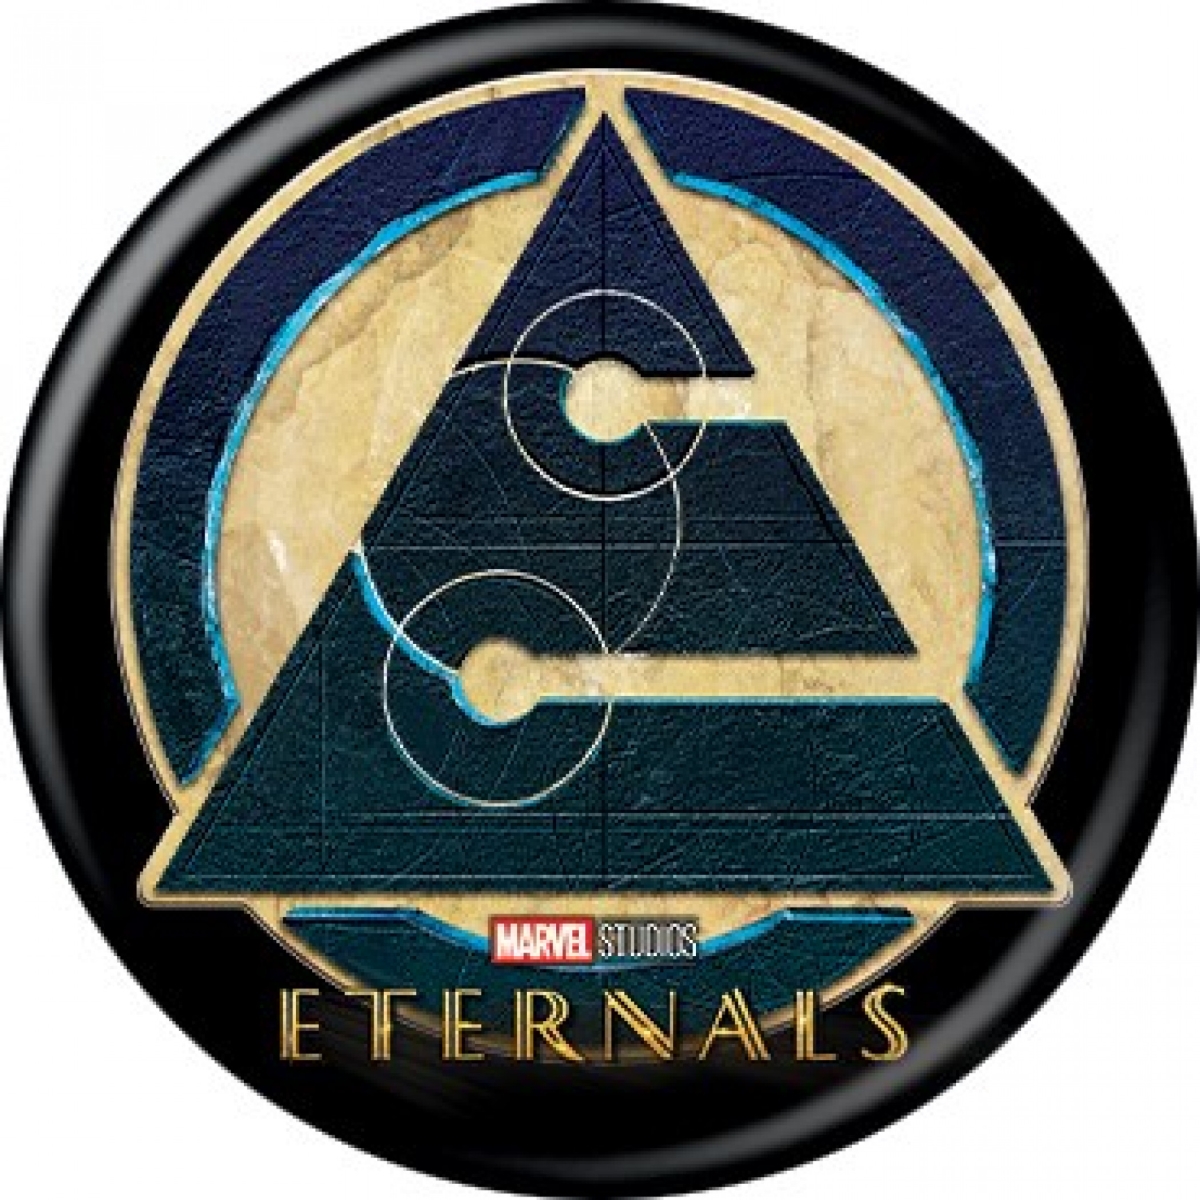 Picture of The Eternals 839170 Marvel Comics Triangle Symbol Button